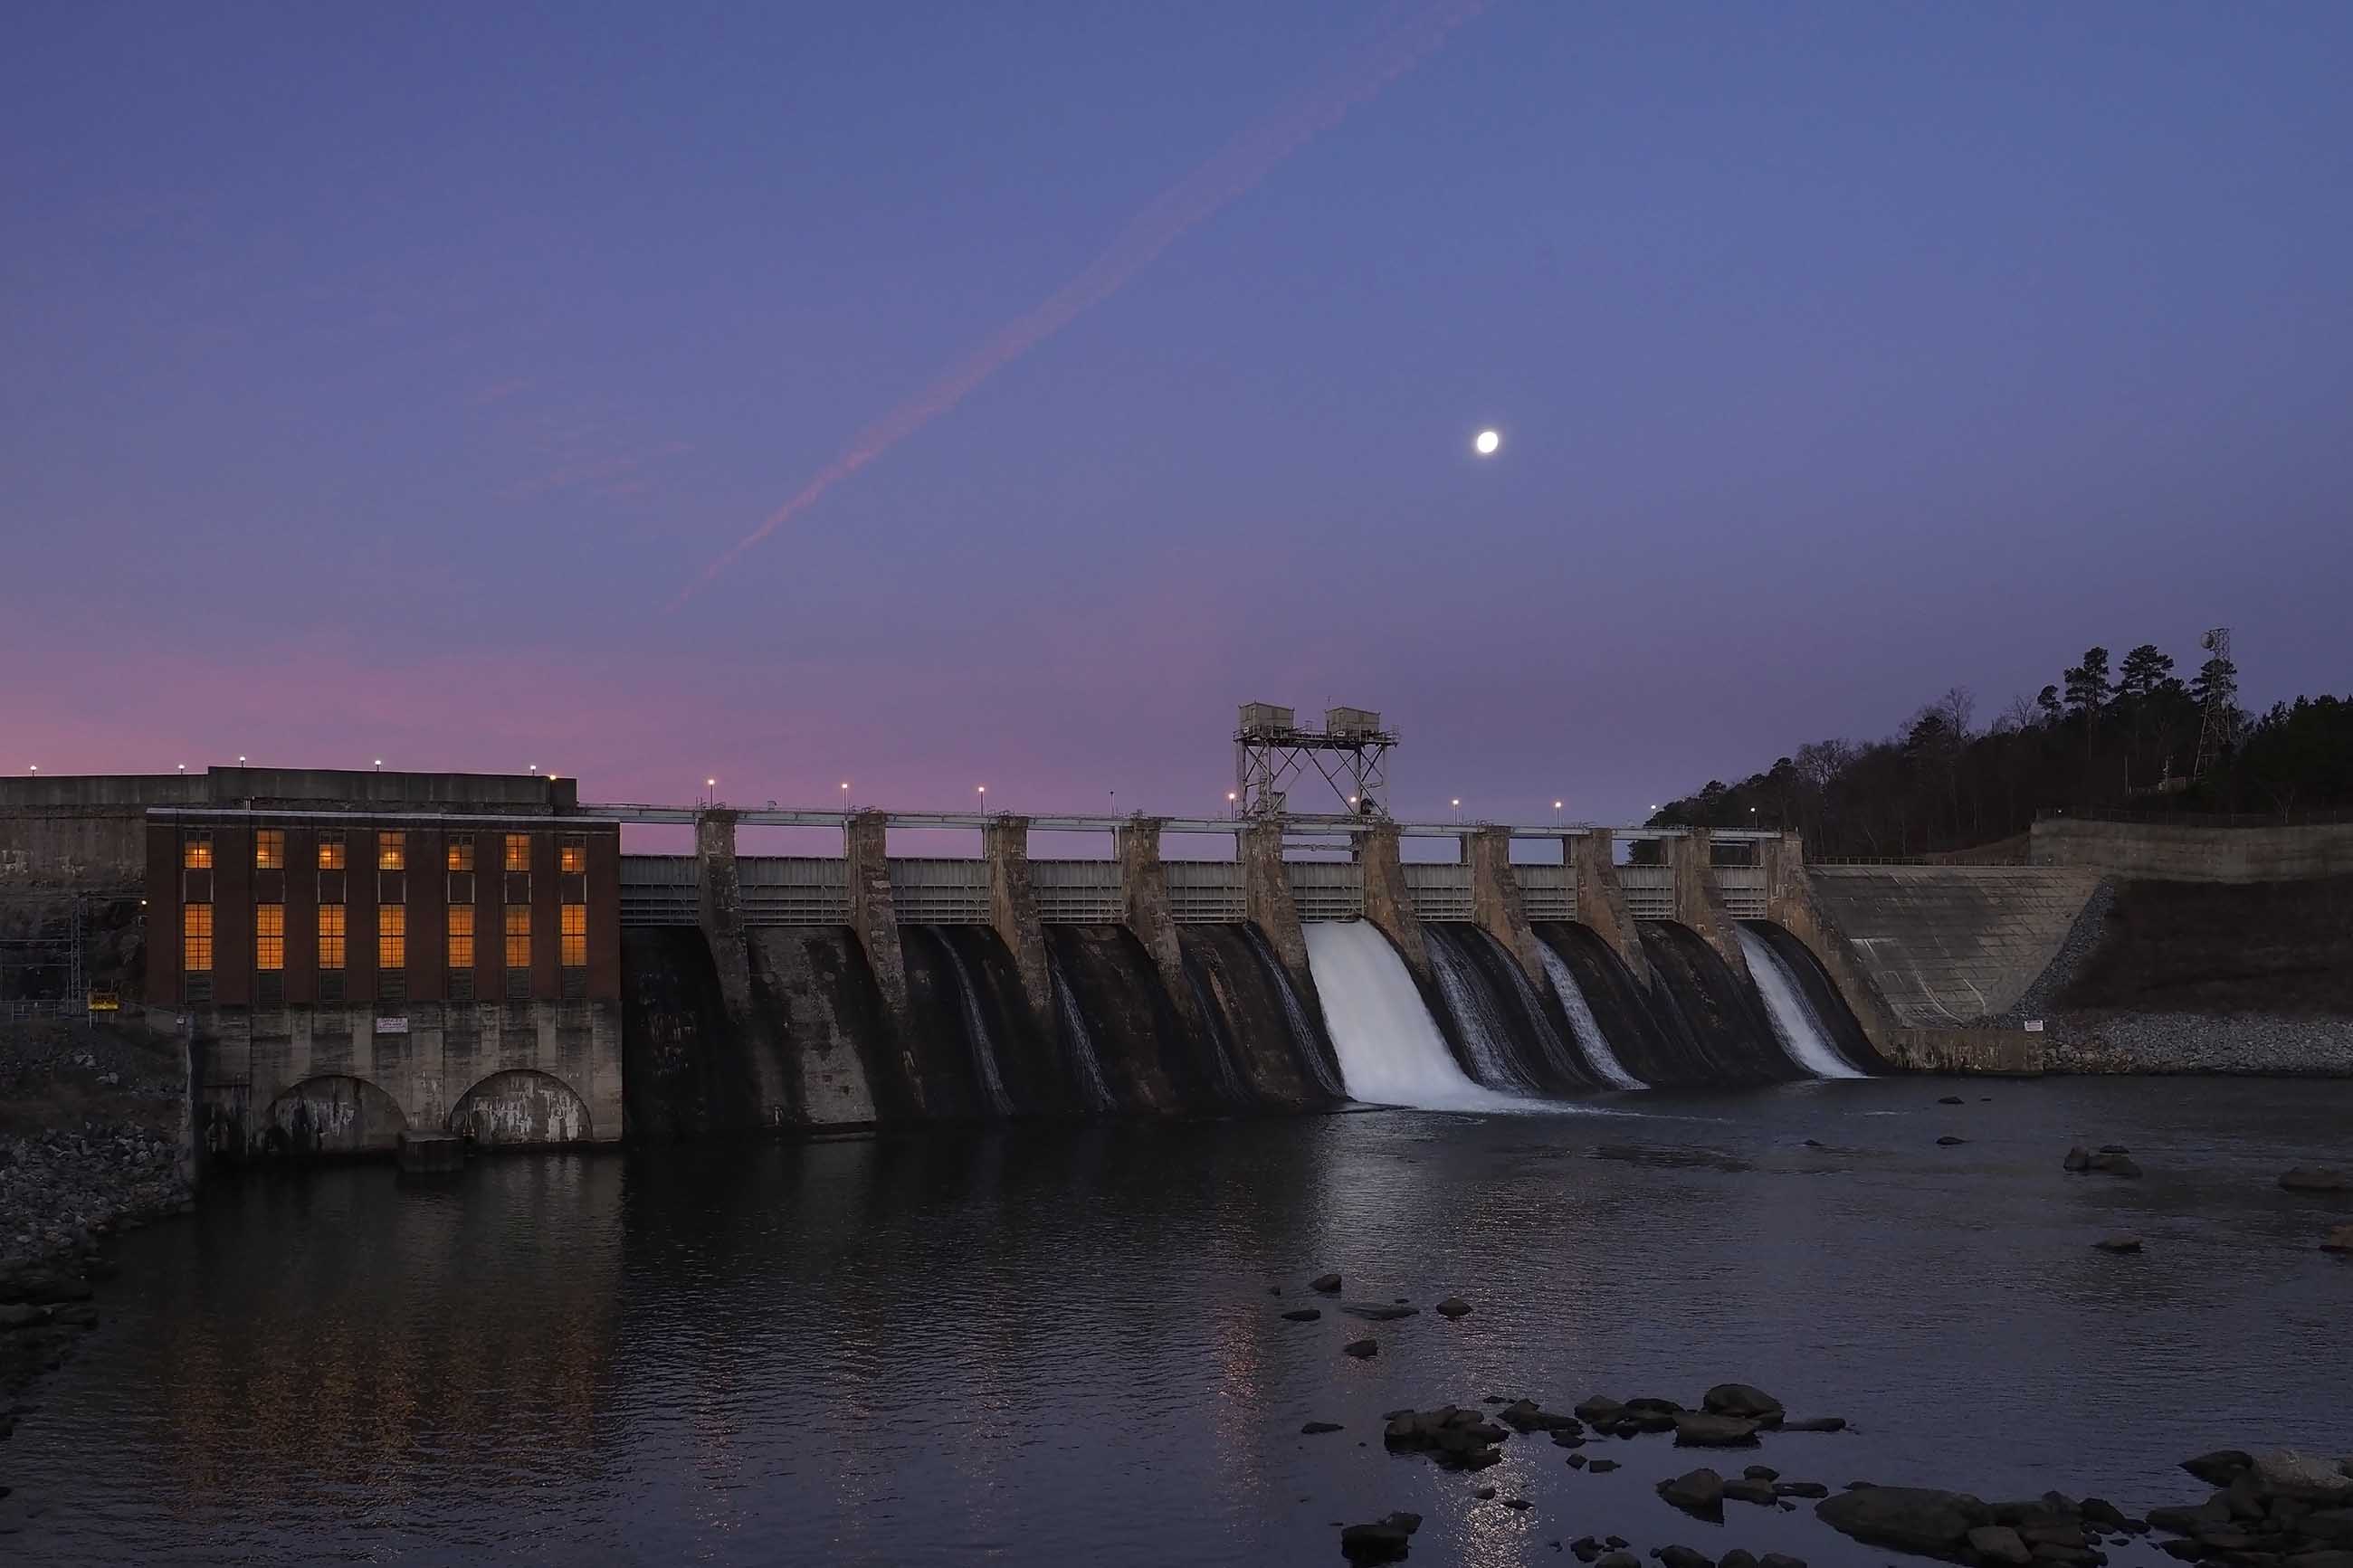 The moon set in the west as water from Lake Hickory on the Catawba River outside Conover, NC, flows through the gates of the Oxford Hydro Station dam. Image by Larry C. Price. United States, 2016.